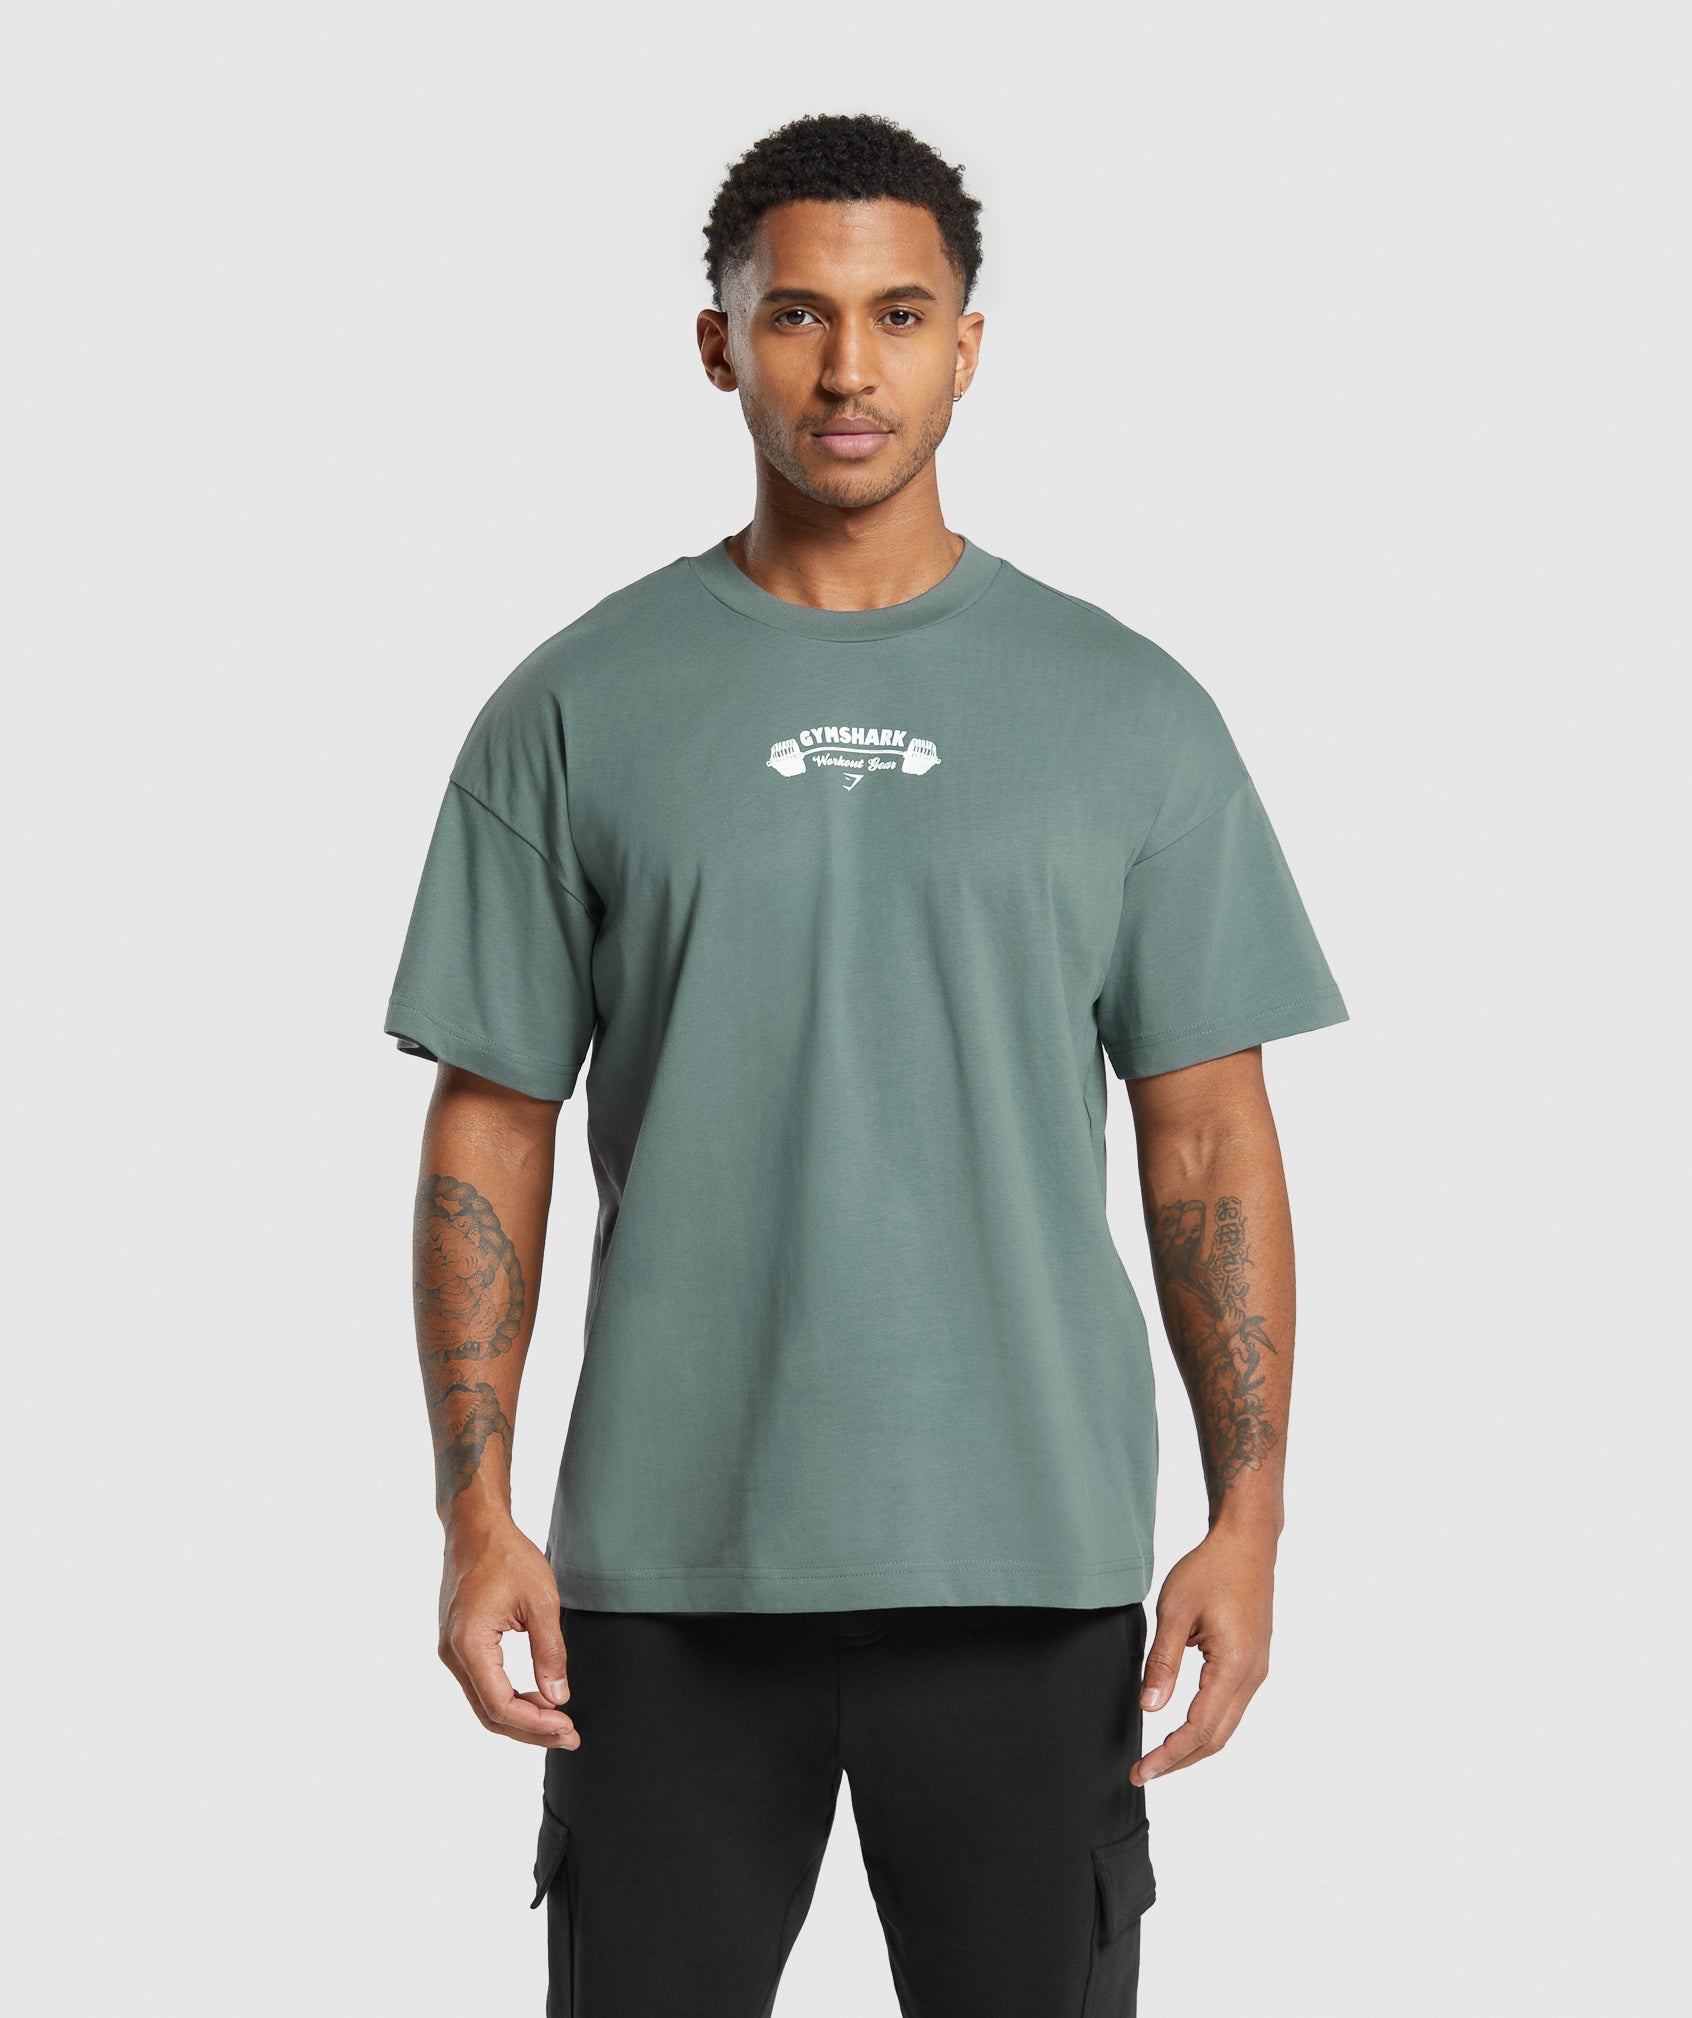 Workout Gear T-Shirt in Cargo Teal - view 2